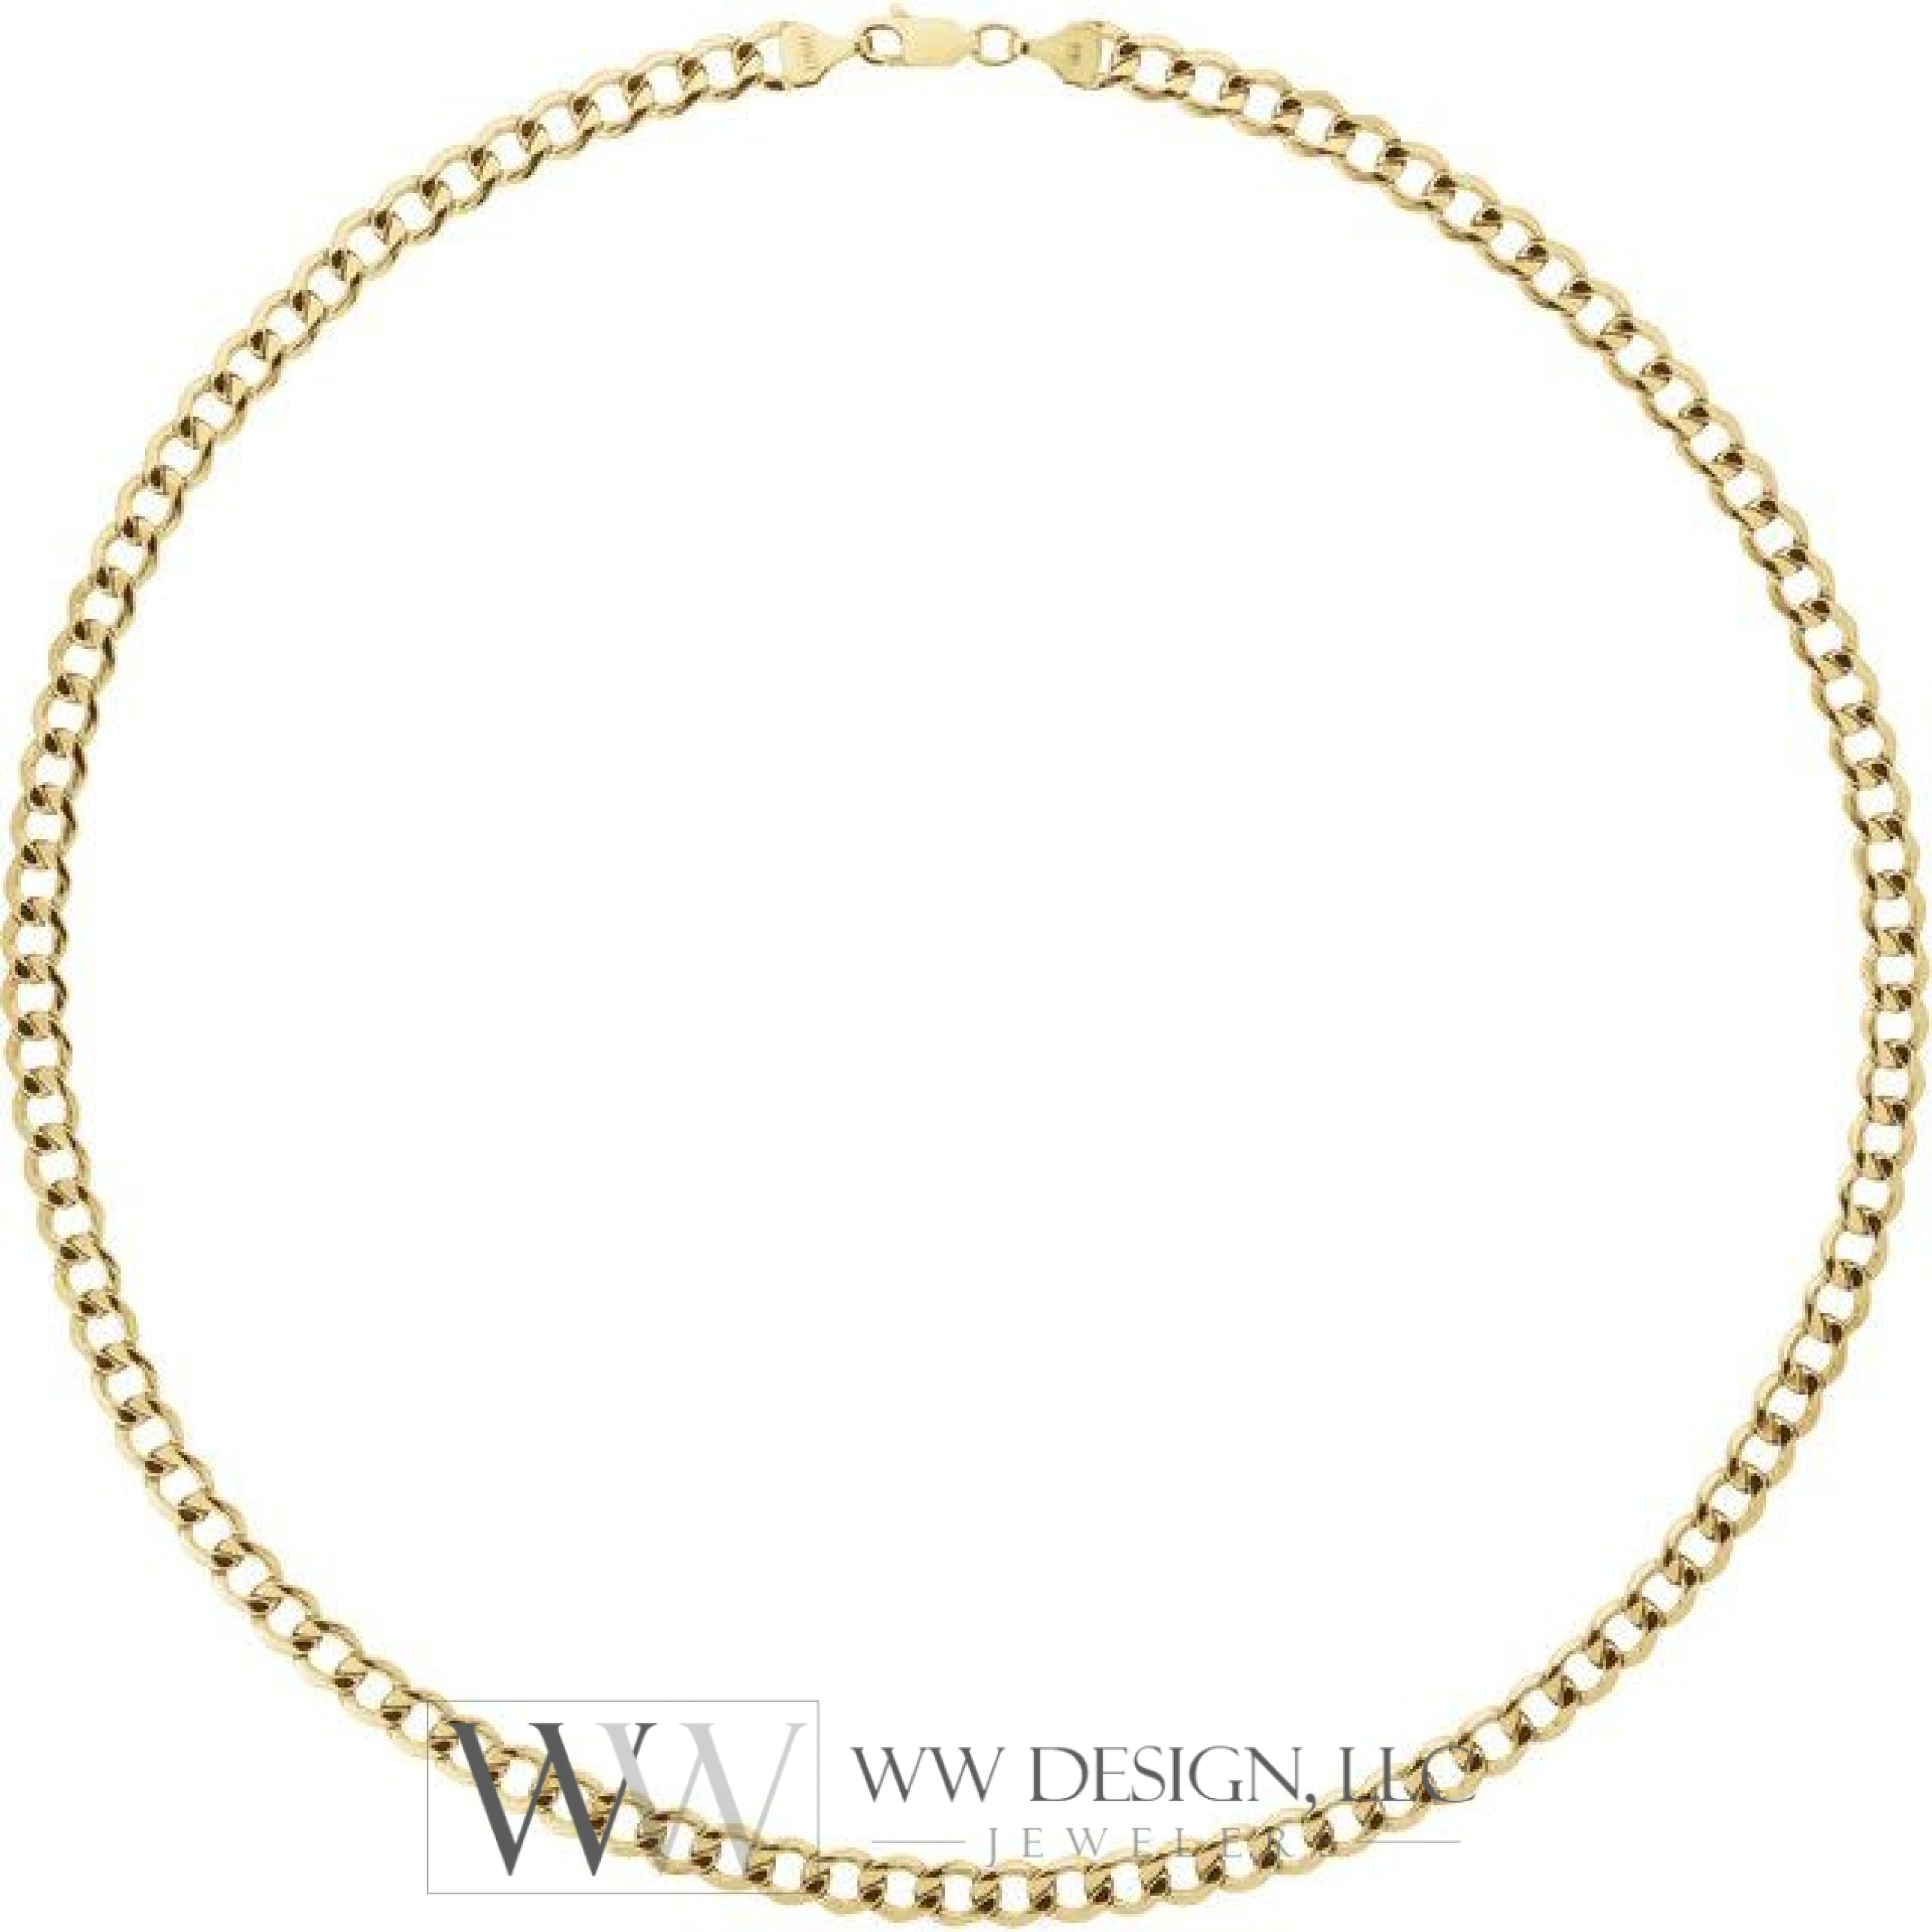 5.3mm Hollow Curb Chain Bracelet or Necklace - 14k Yellow Gold